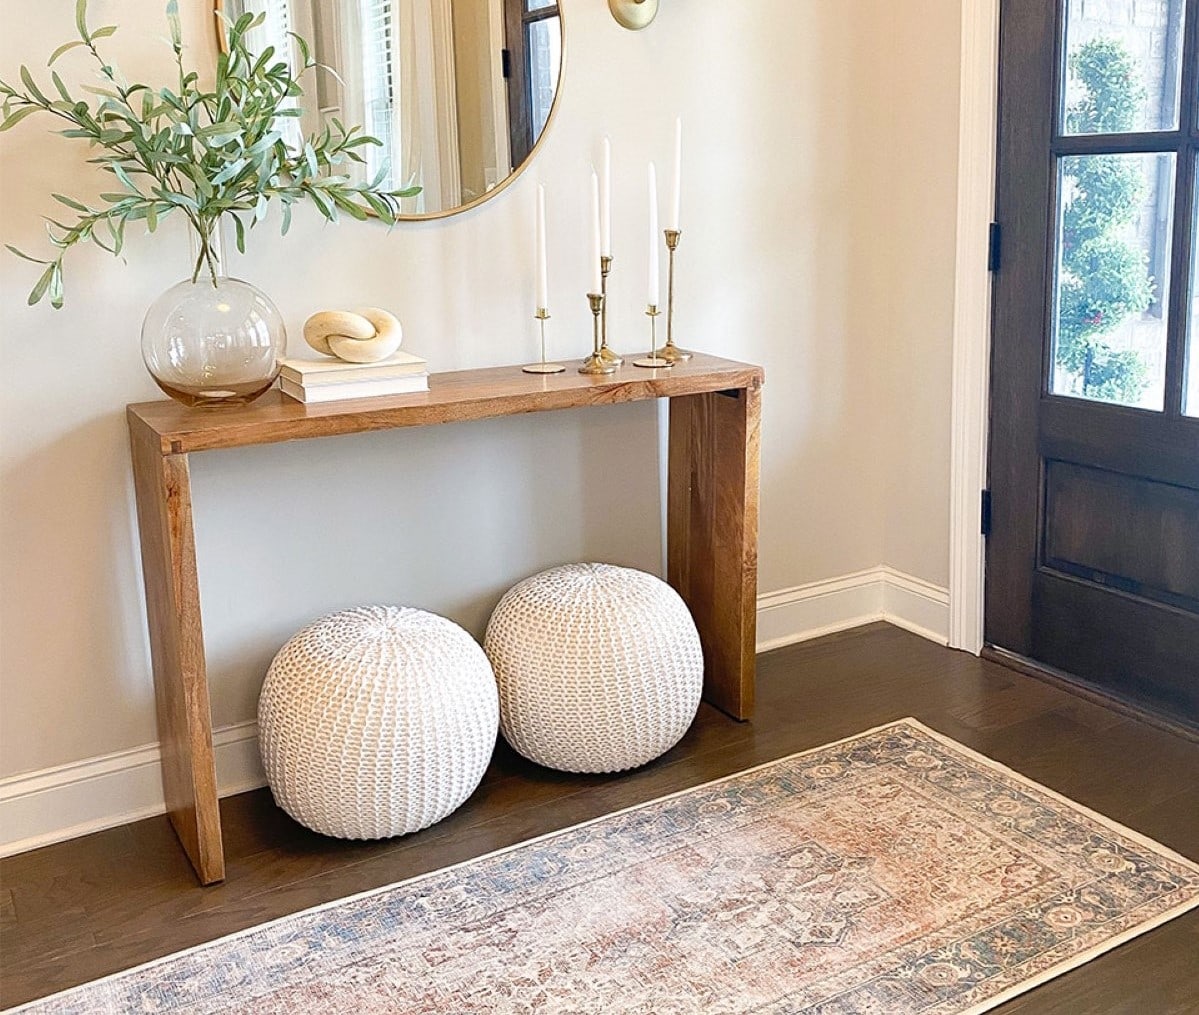 Make a Grand Entrance with an Entryway Rug